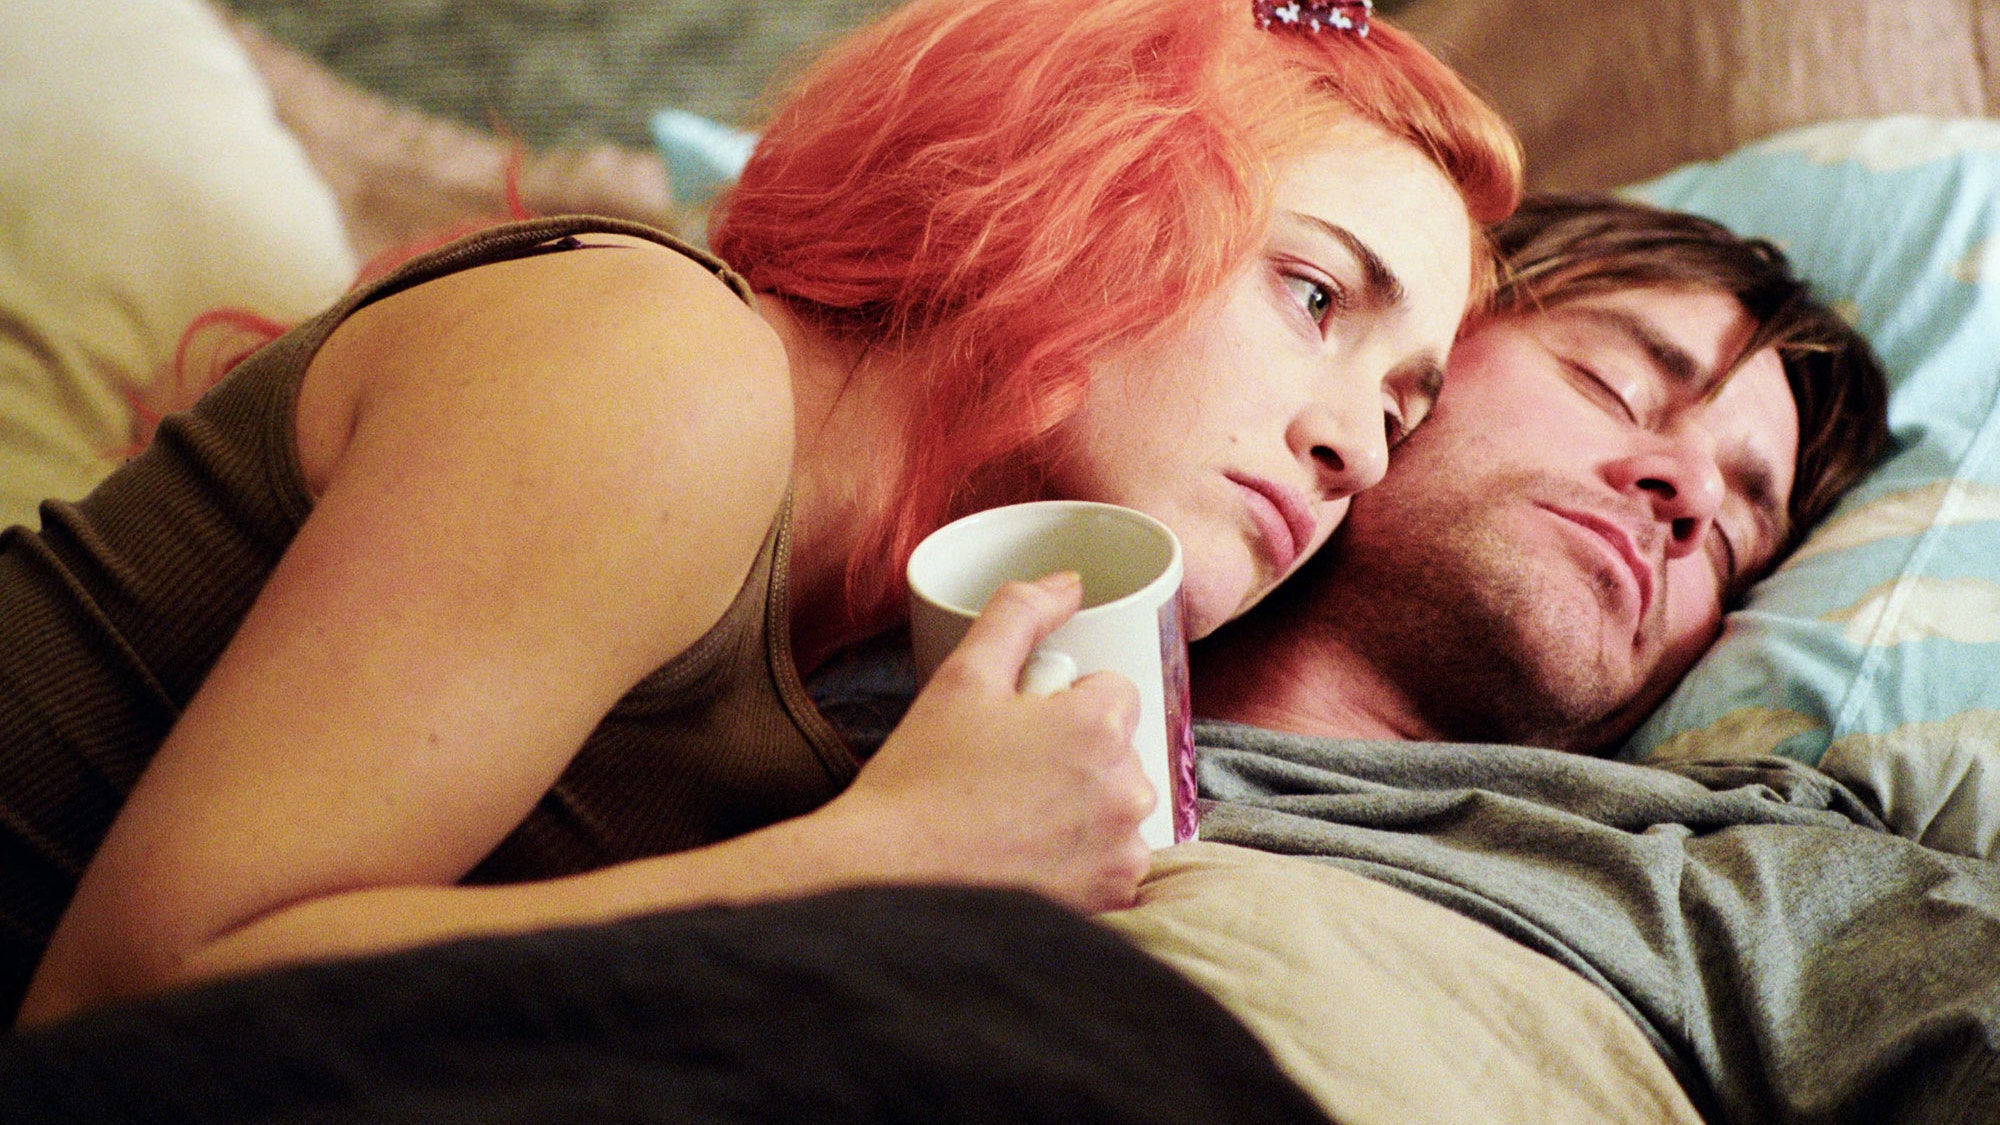 Joel (Jim Carrey) and Clementine (Kate Winslet) lay together on a bed in Charlie Kaufman's movie Eternal Sunshine Of The Spotless Mind.